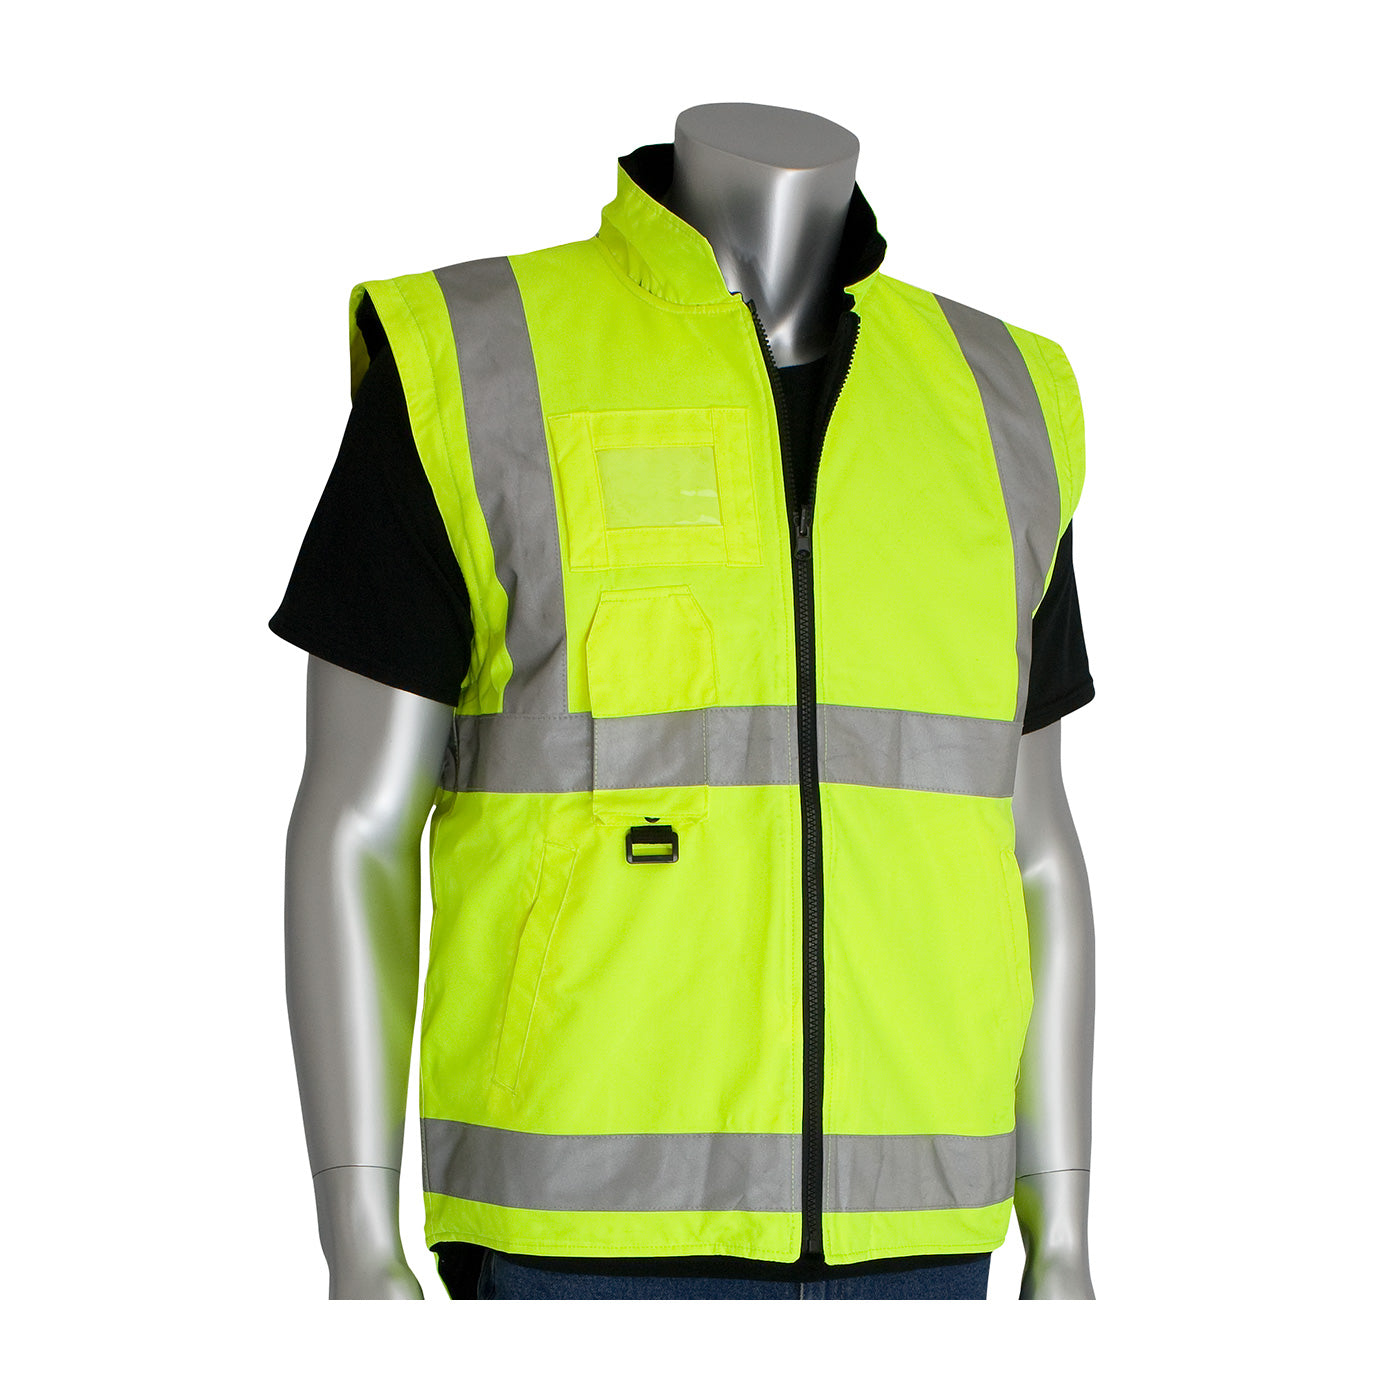 PIP 343-1756-YEL/5X ANSI Type R Class 3 7-in-1 All Conditions Coat with Inner Jacket and Vest Combination